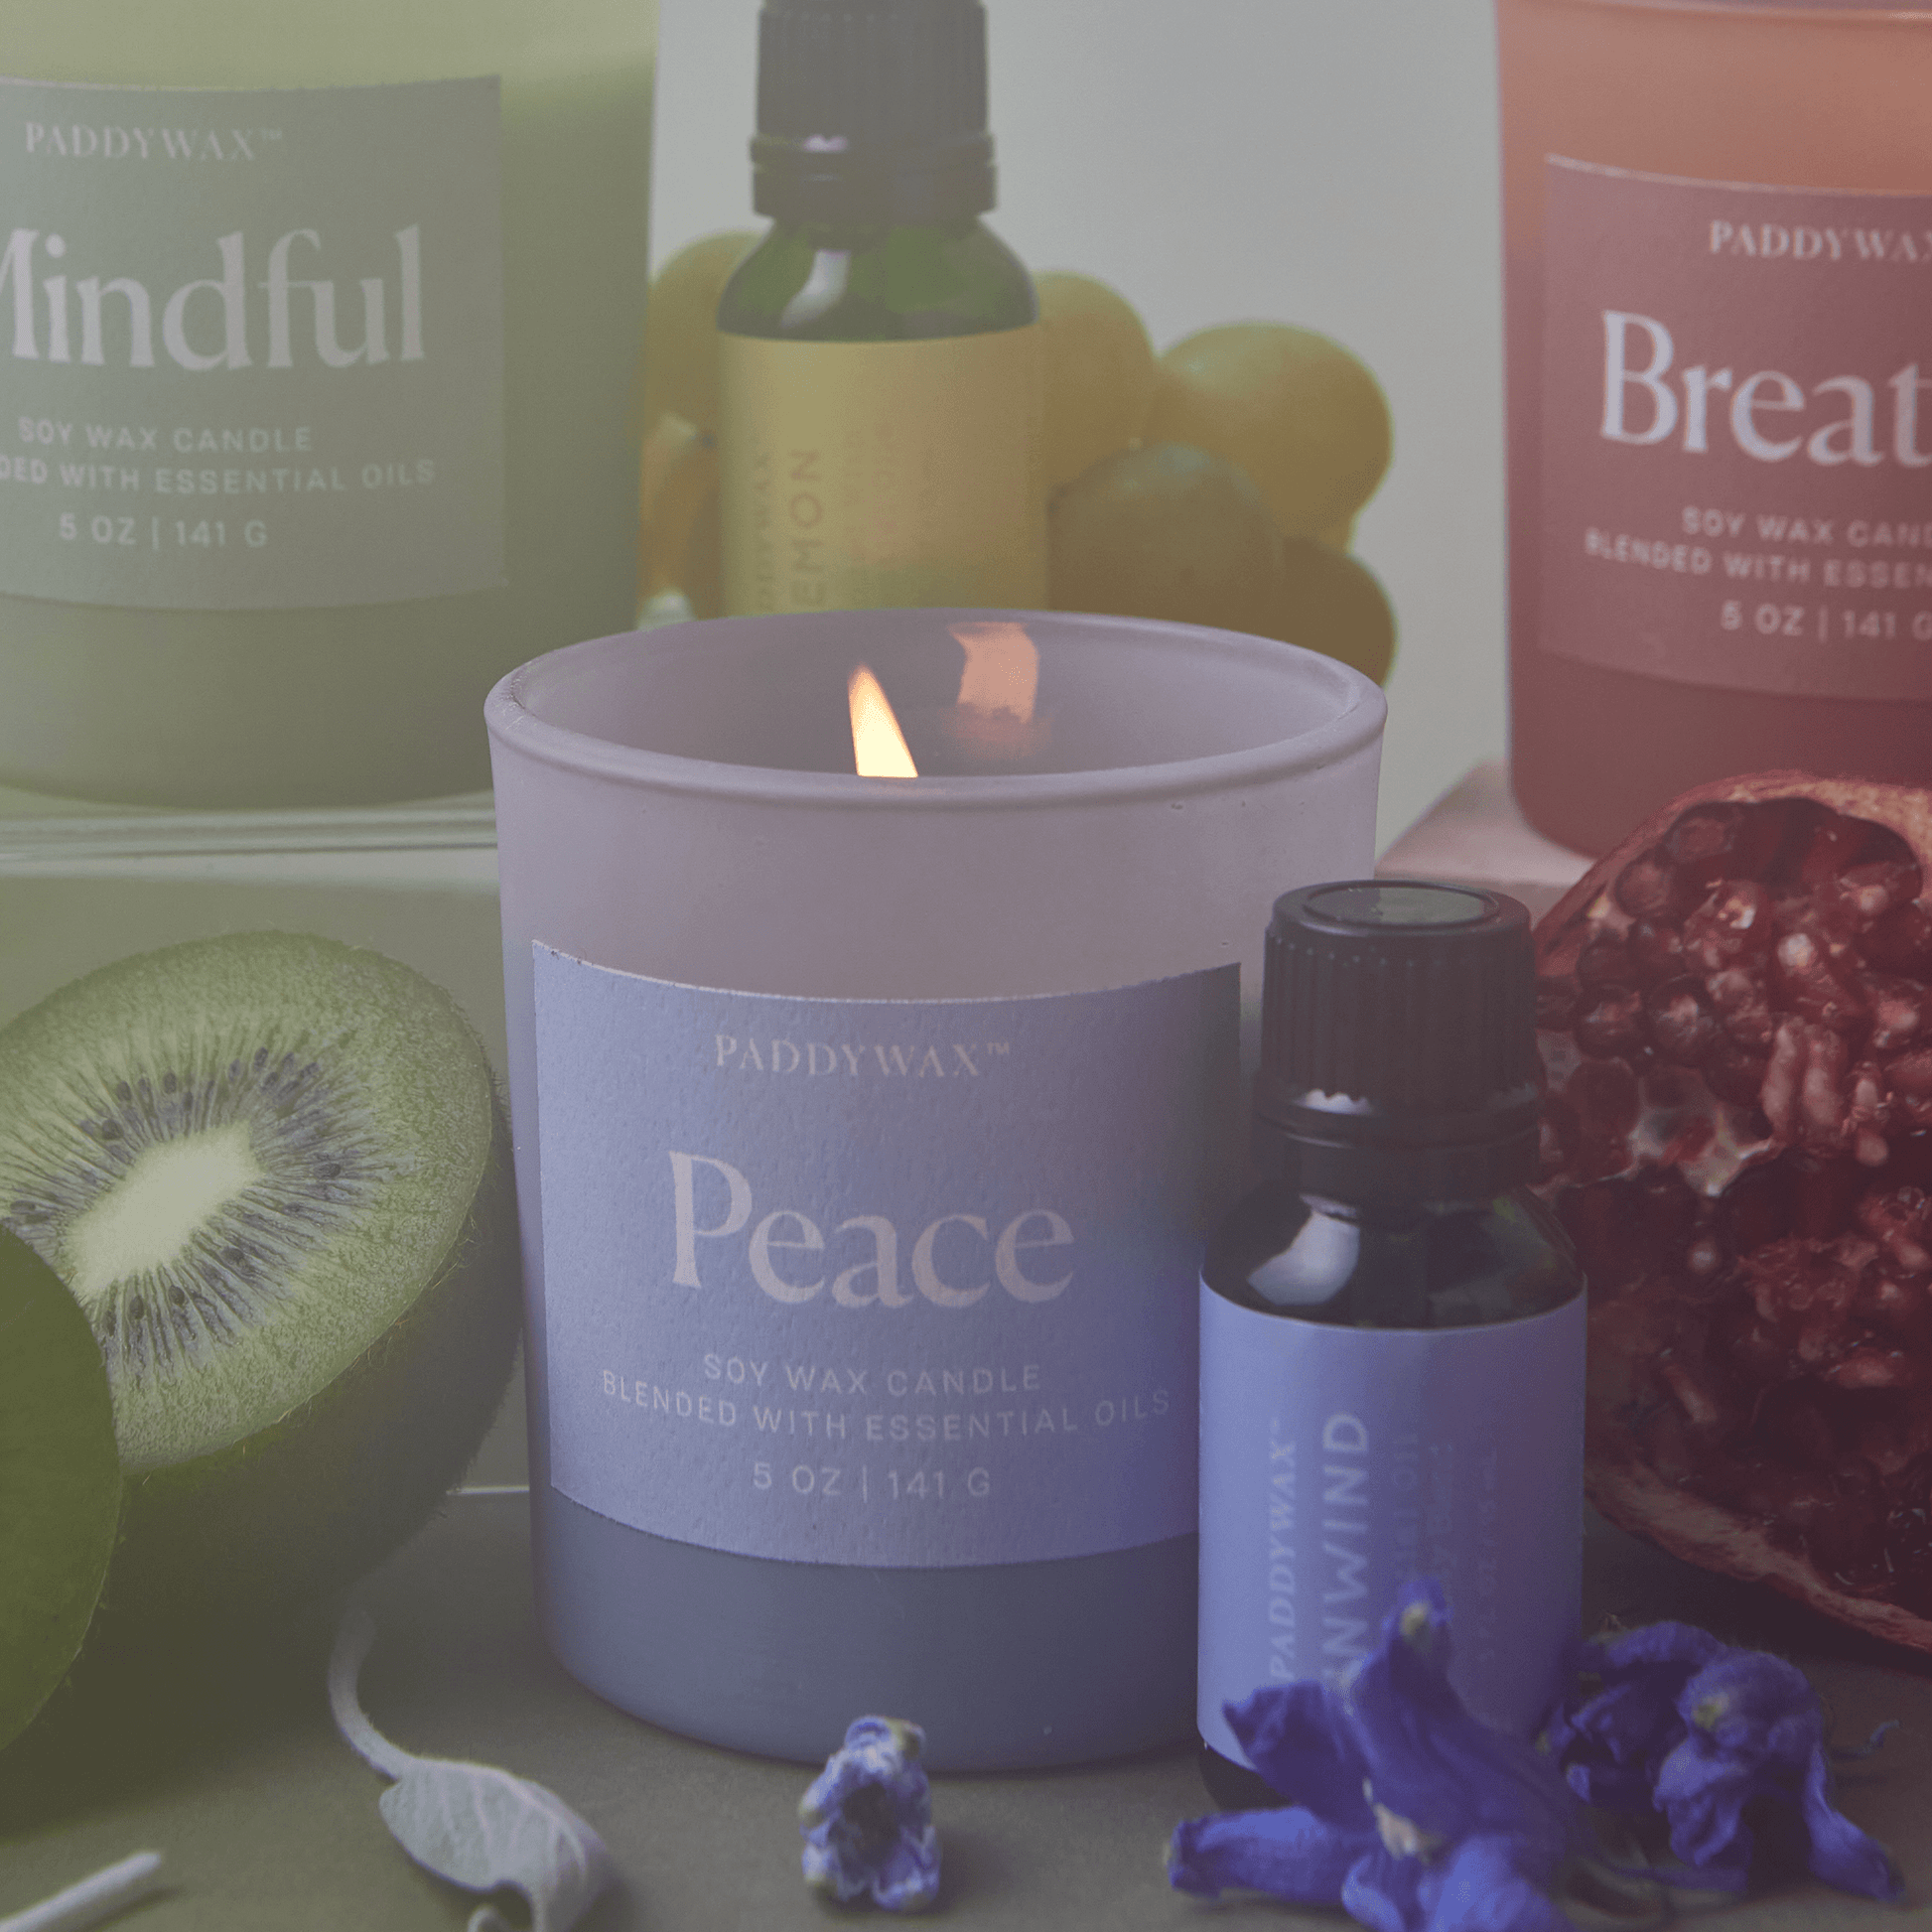 Paddywax Wellness Candle | Mindful 5 oz